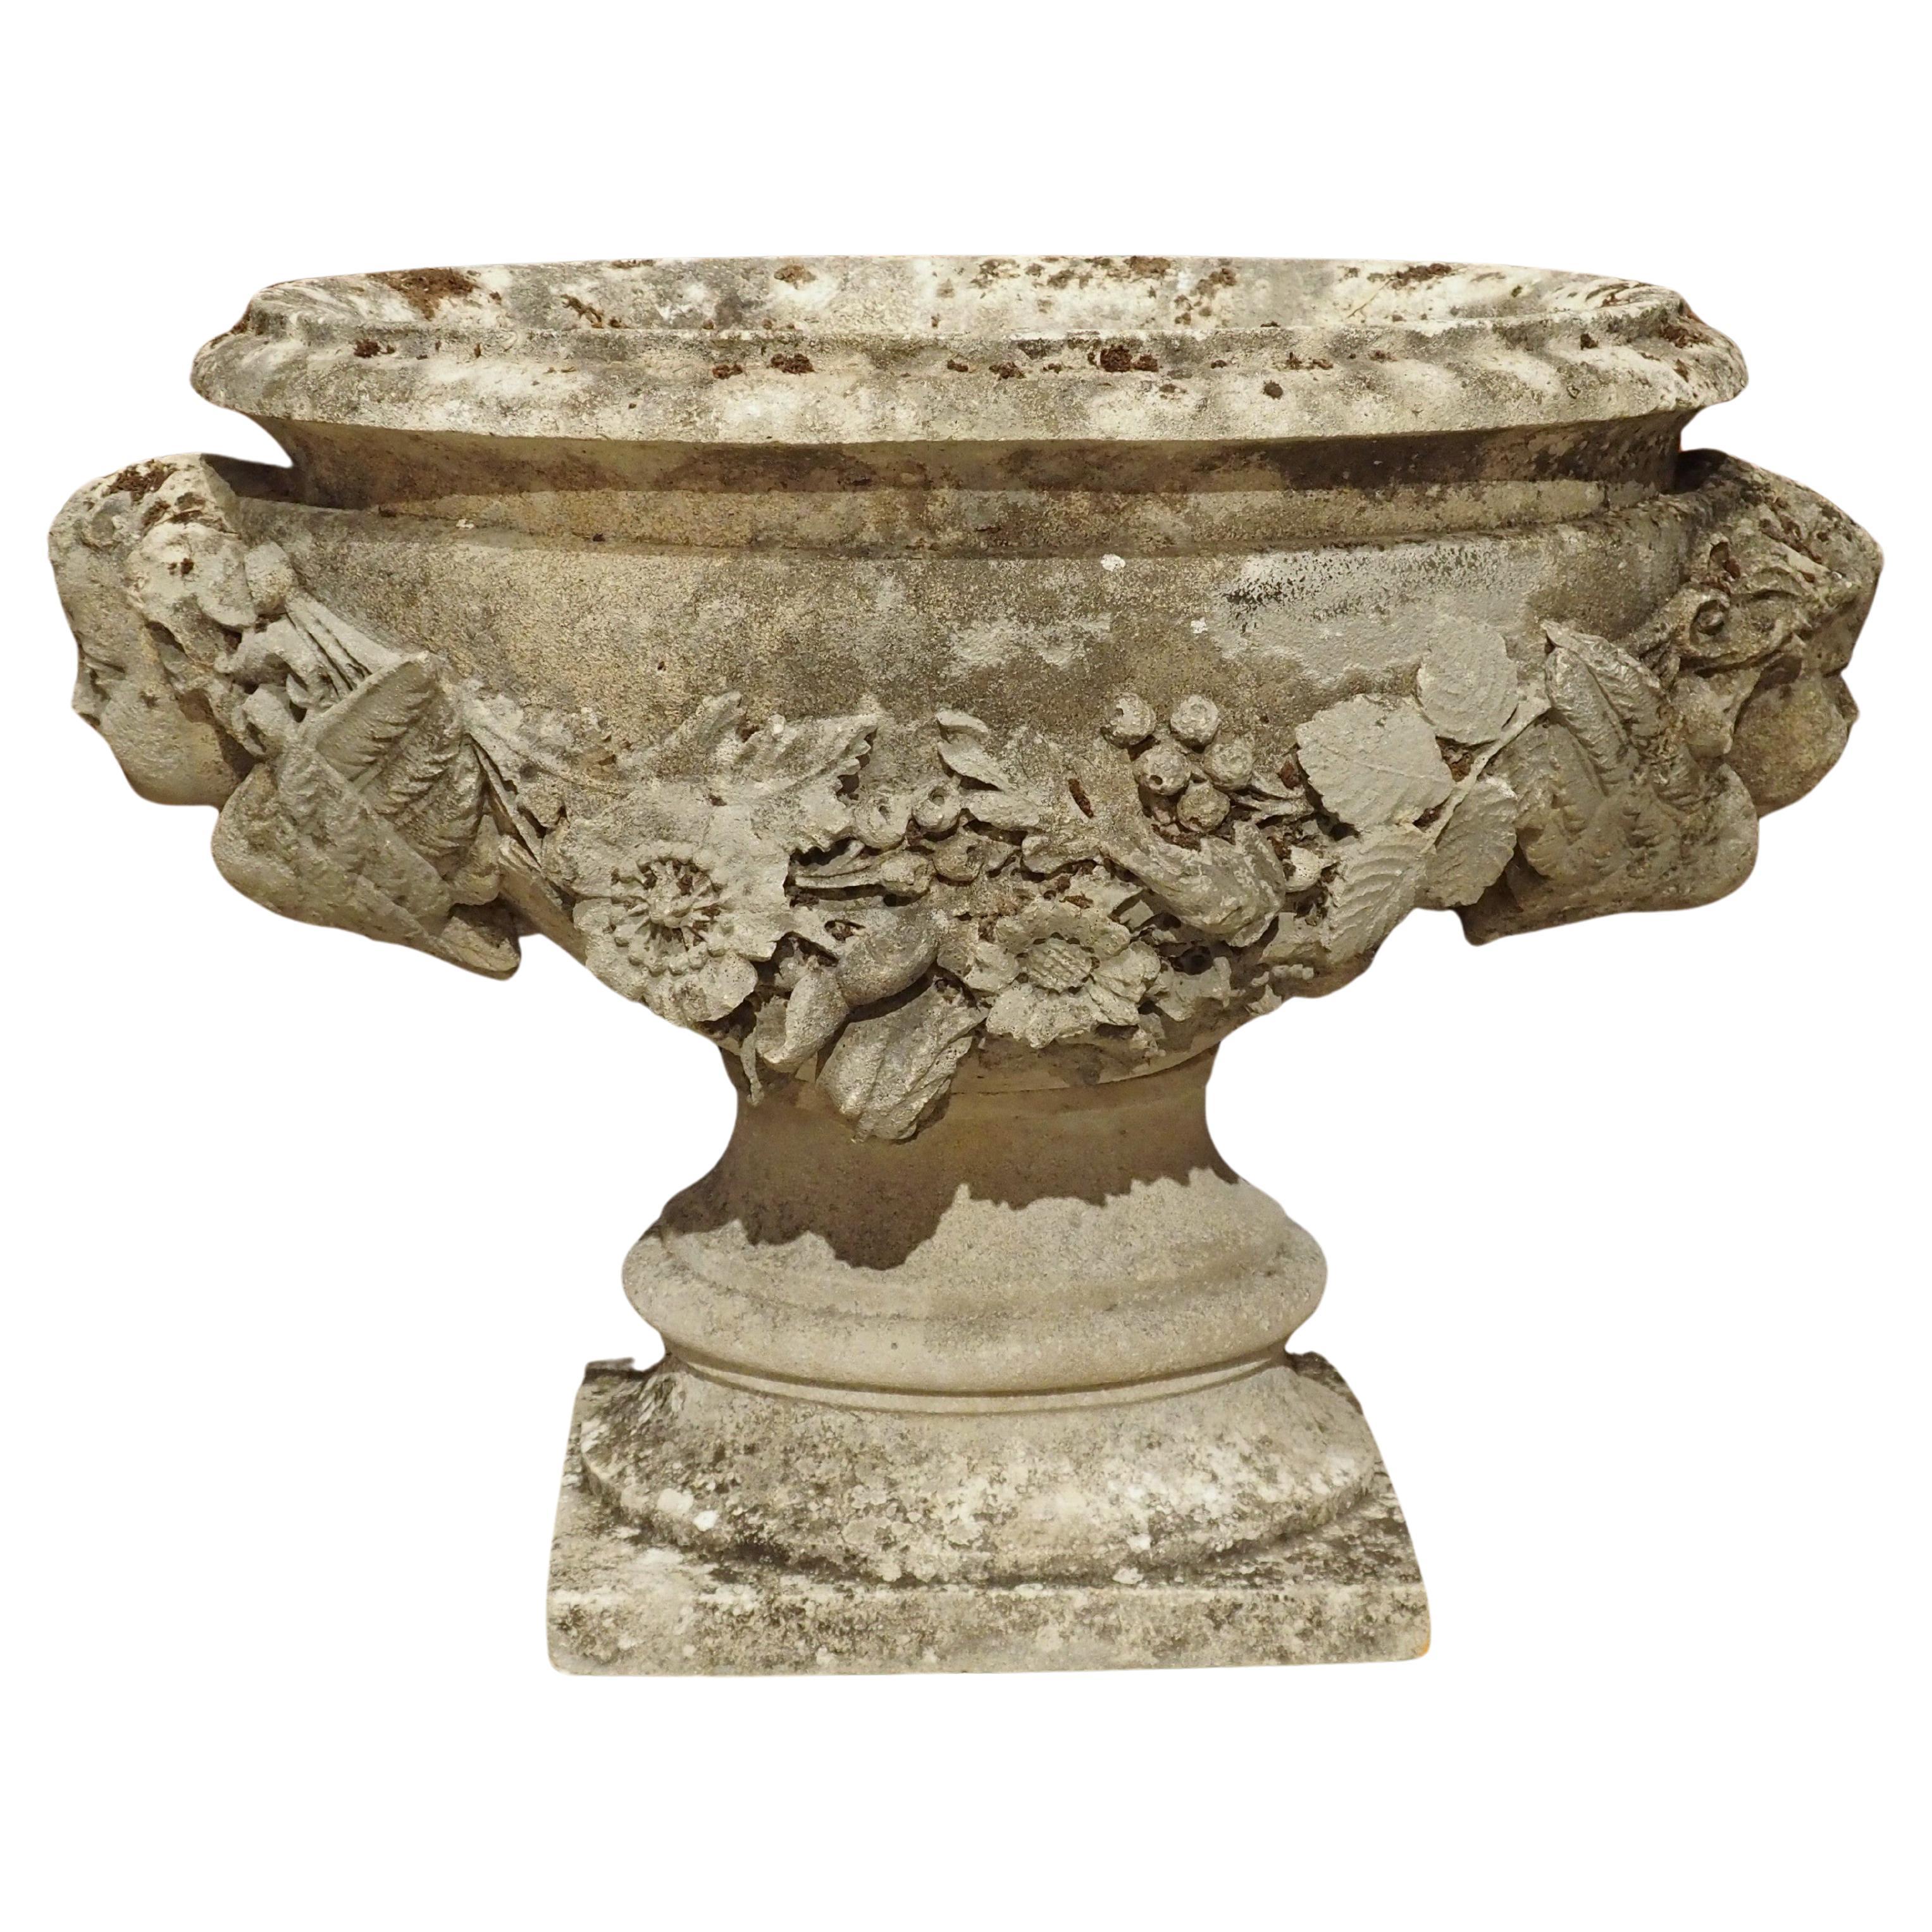 Finely Carved Antique Limestone Jardiniere Planter from France, Circa 1800